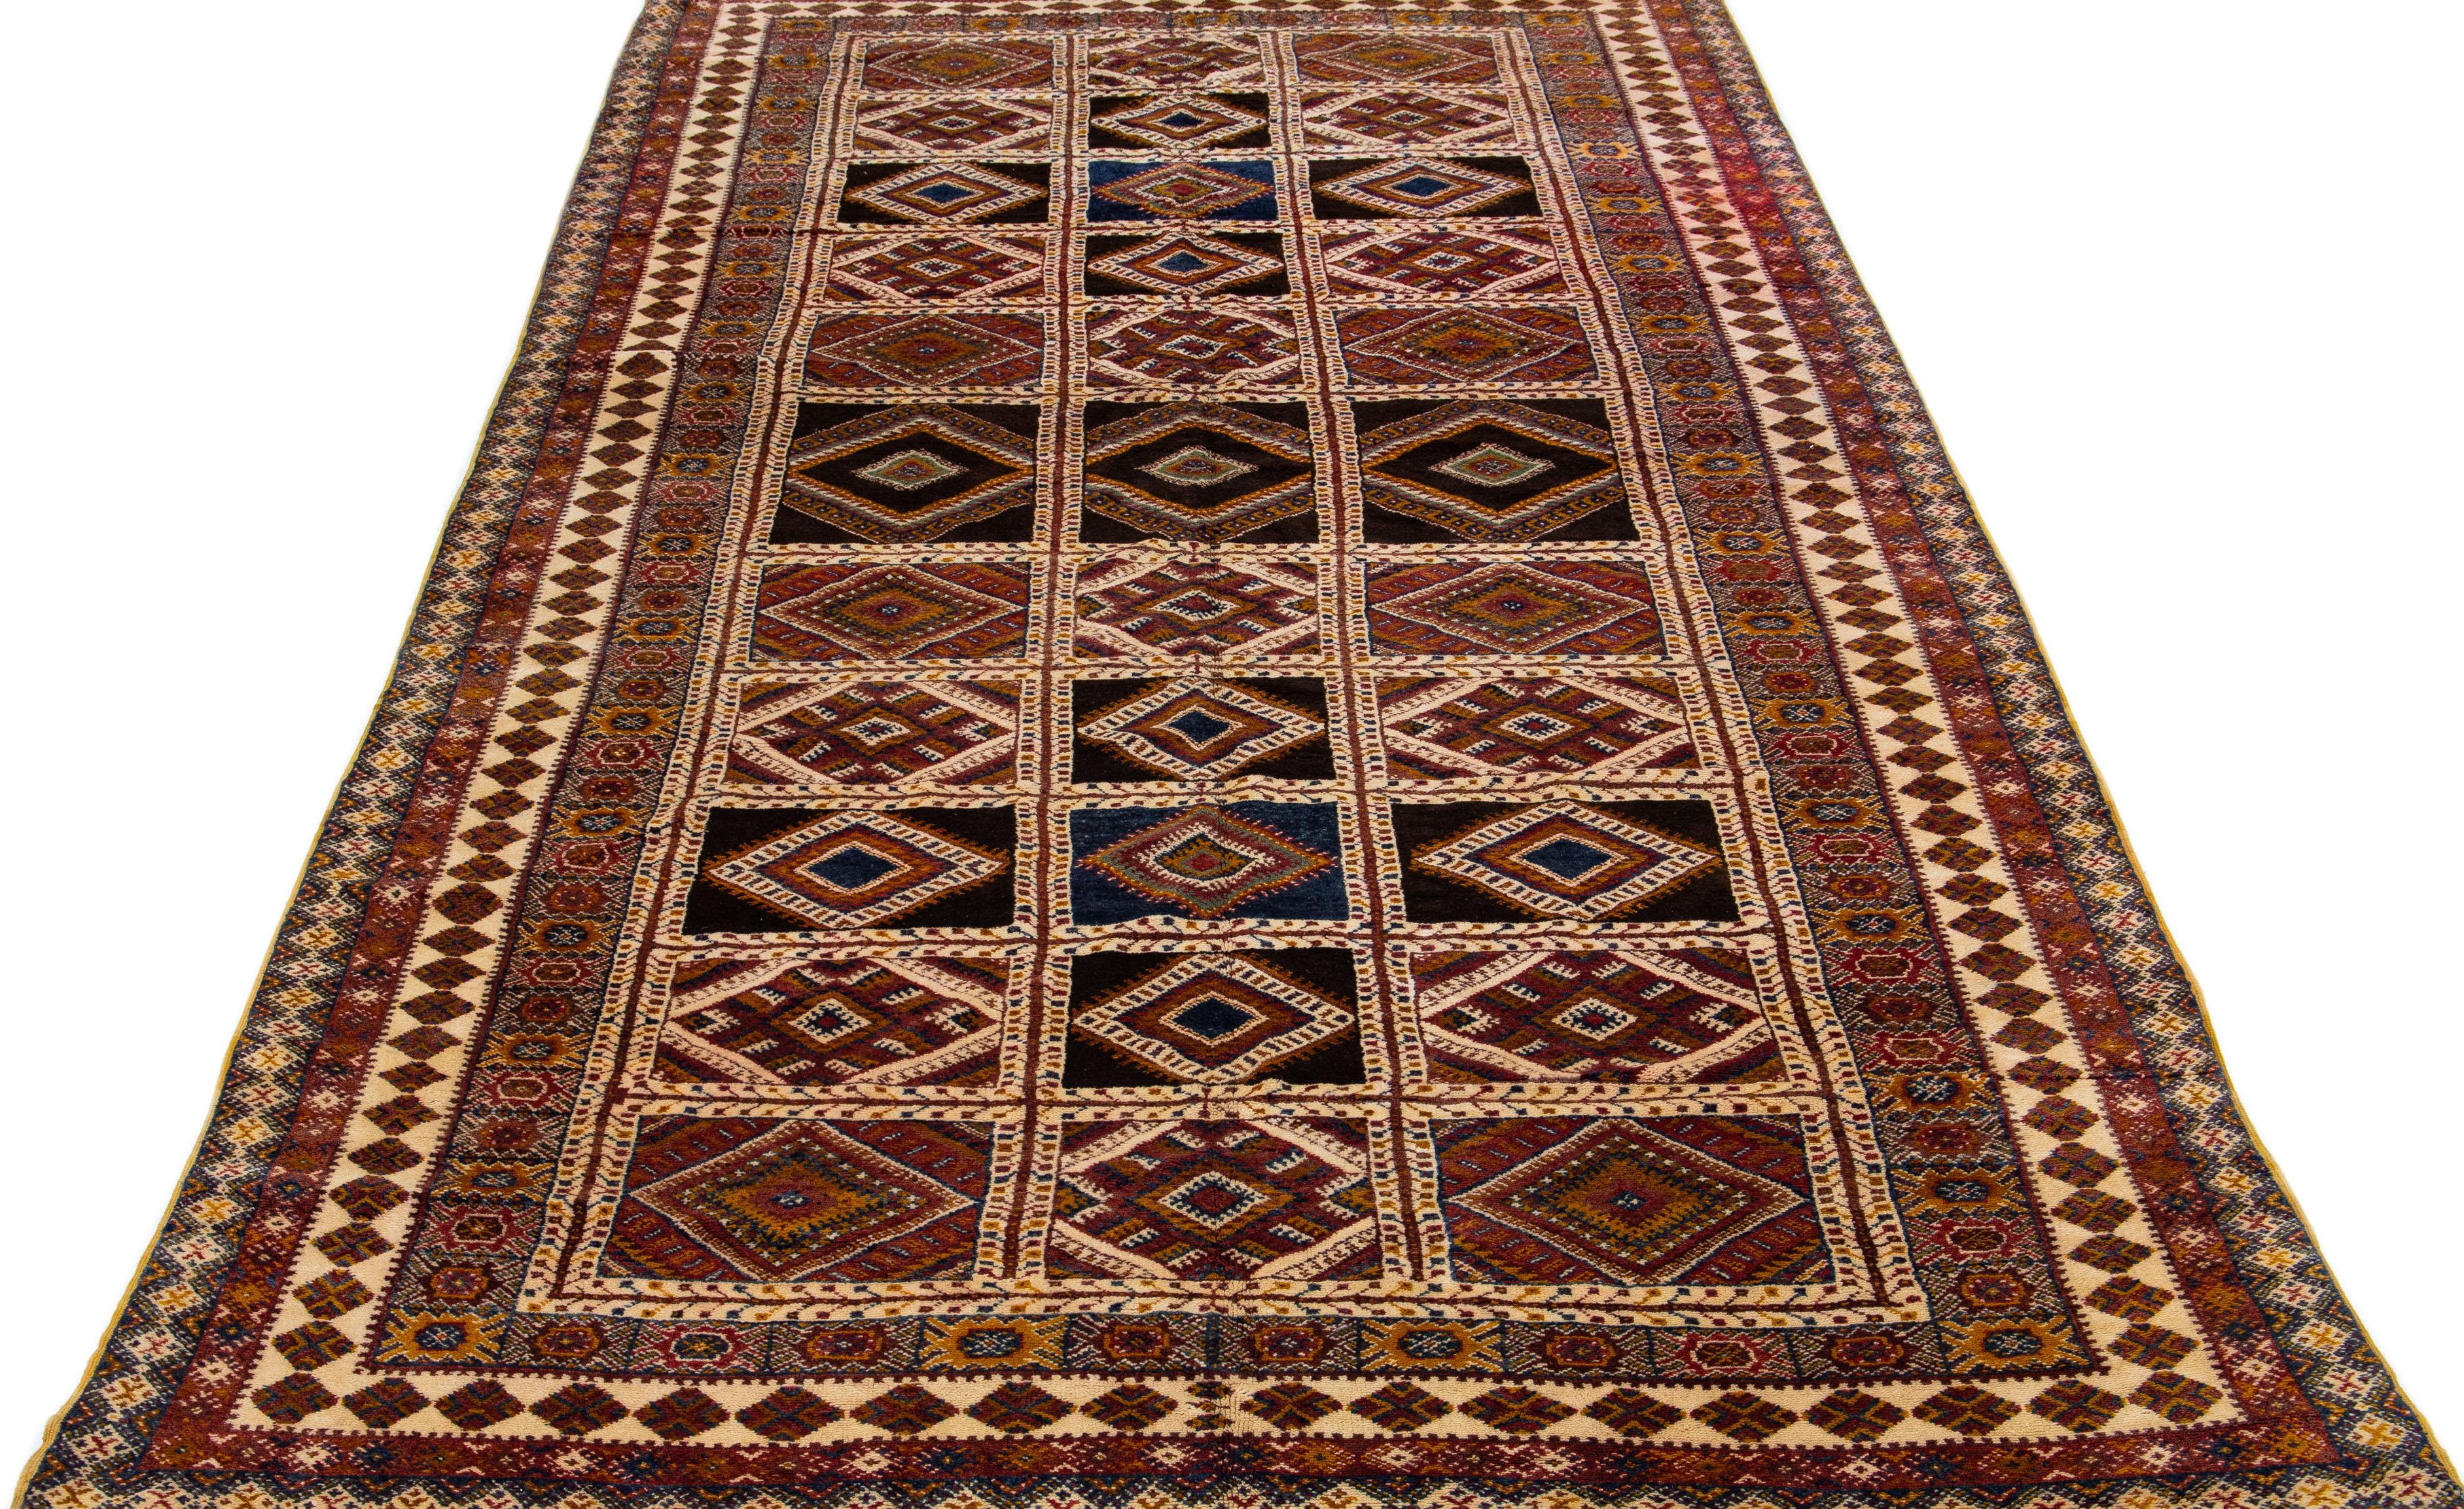 Beautiful Vintage oversize  Moroccan hand-knotted wool rug with a blue, beige, and red color field in an all-over geometric tribal design.

This rug measures: 8' x 16'1